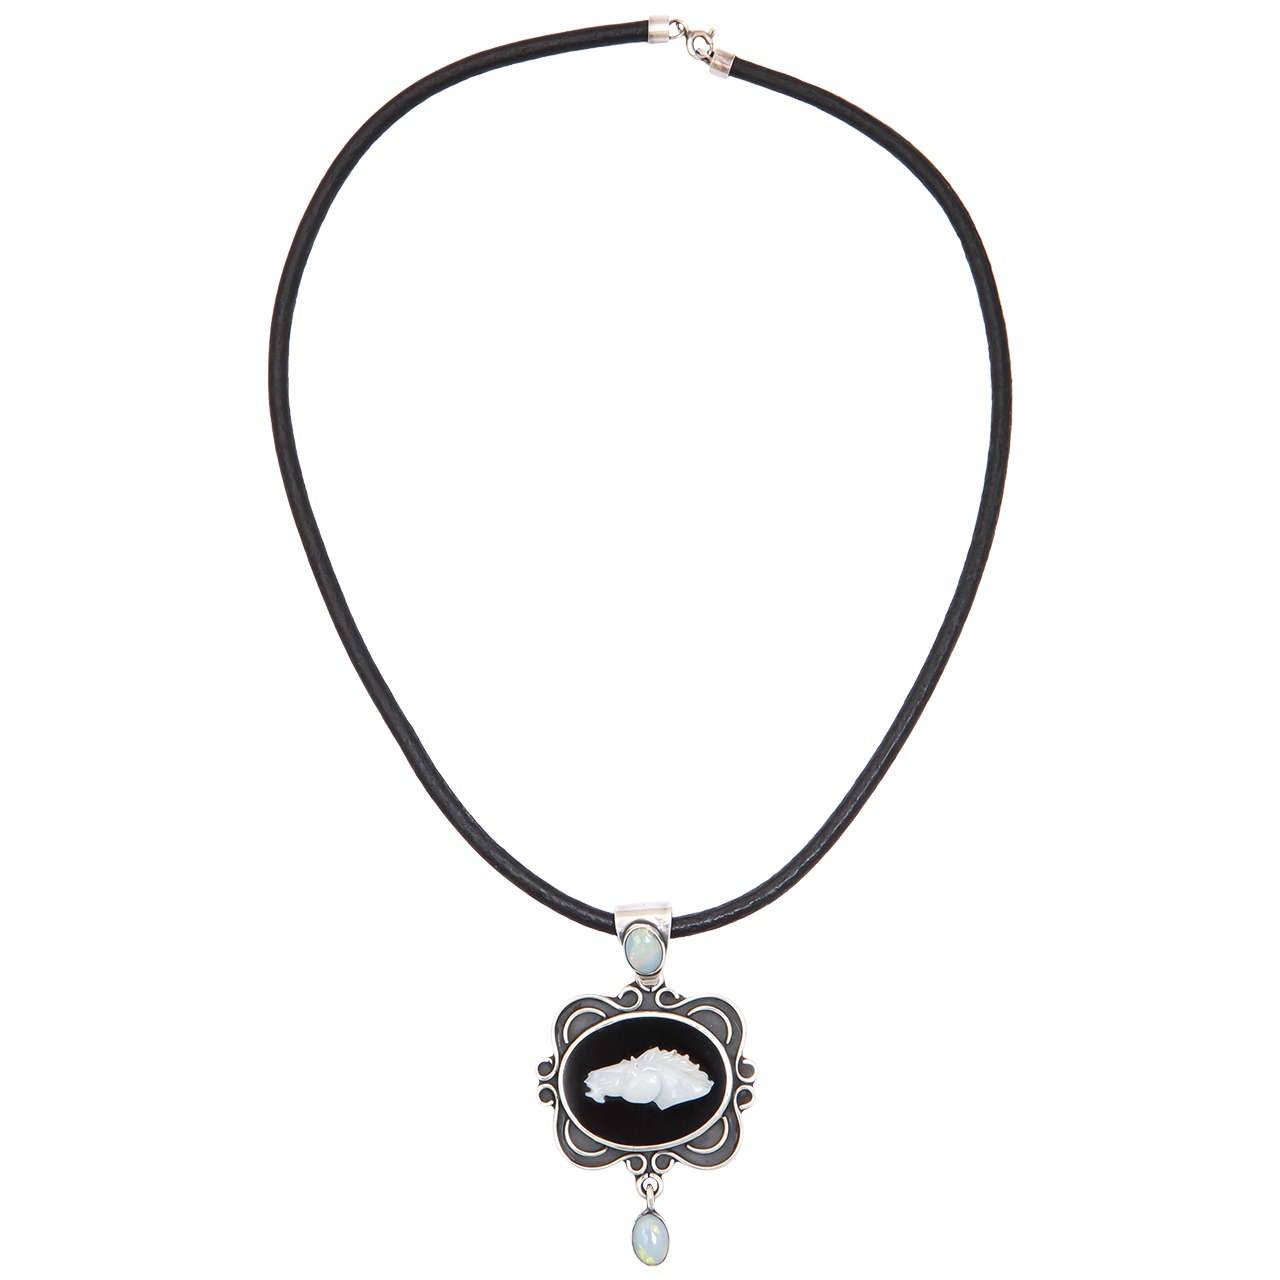 A wonderful necklace for the elegant equestrian. The mounting is hand made in sterling silver with a center of black onyx with a carved opal horsehead. There is a fine opal on the bale and also  as an articulated drop finishing the pendant. The